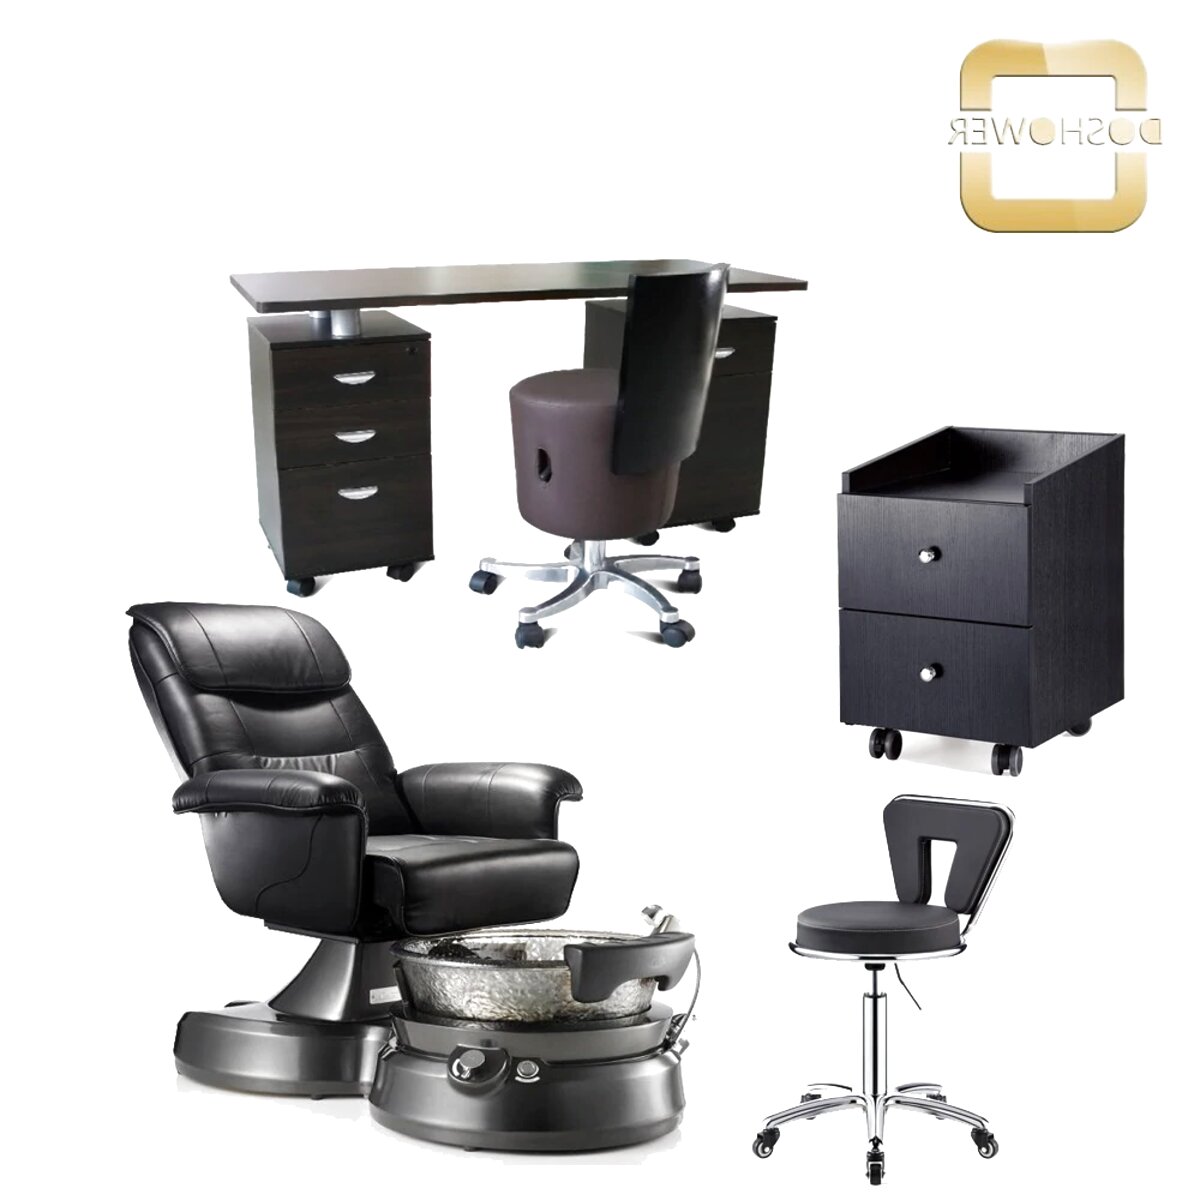 Doshower Hair Salon Equipment China Of Used Beauty Salon Furniture With Pedicure Chair Beauty%2Bsalon%2Bfurniture 